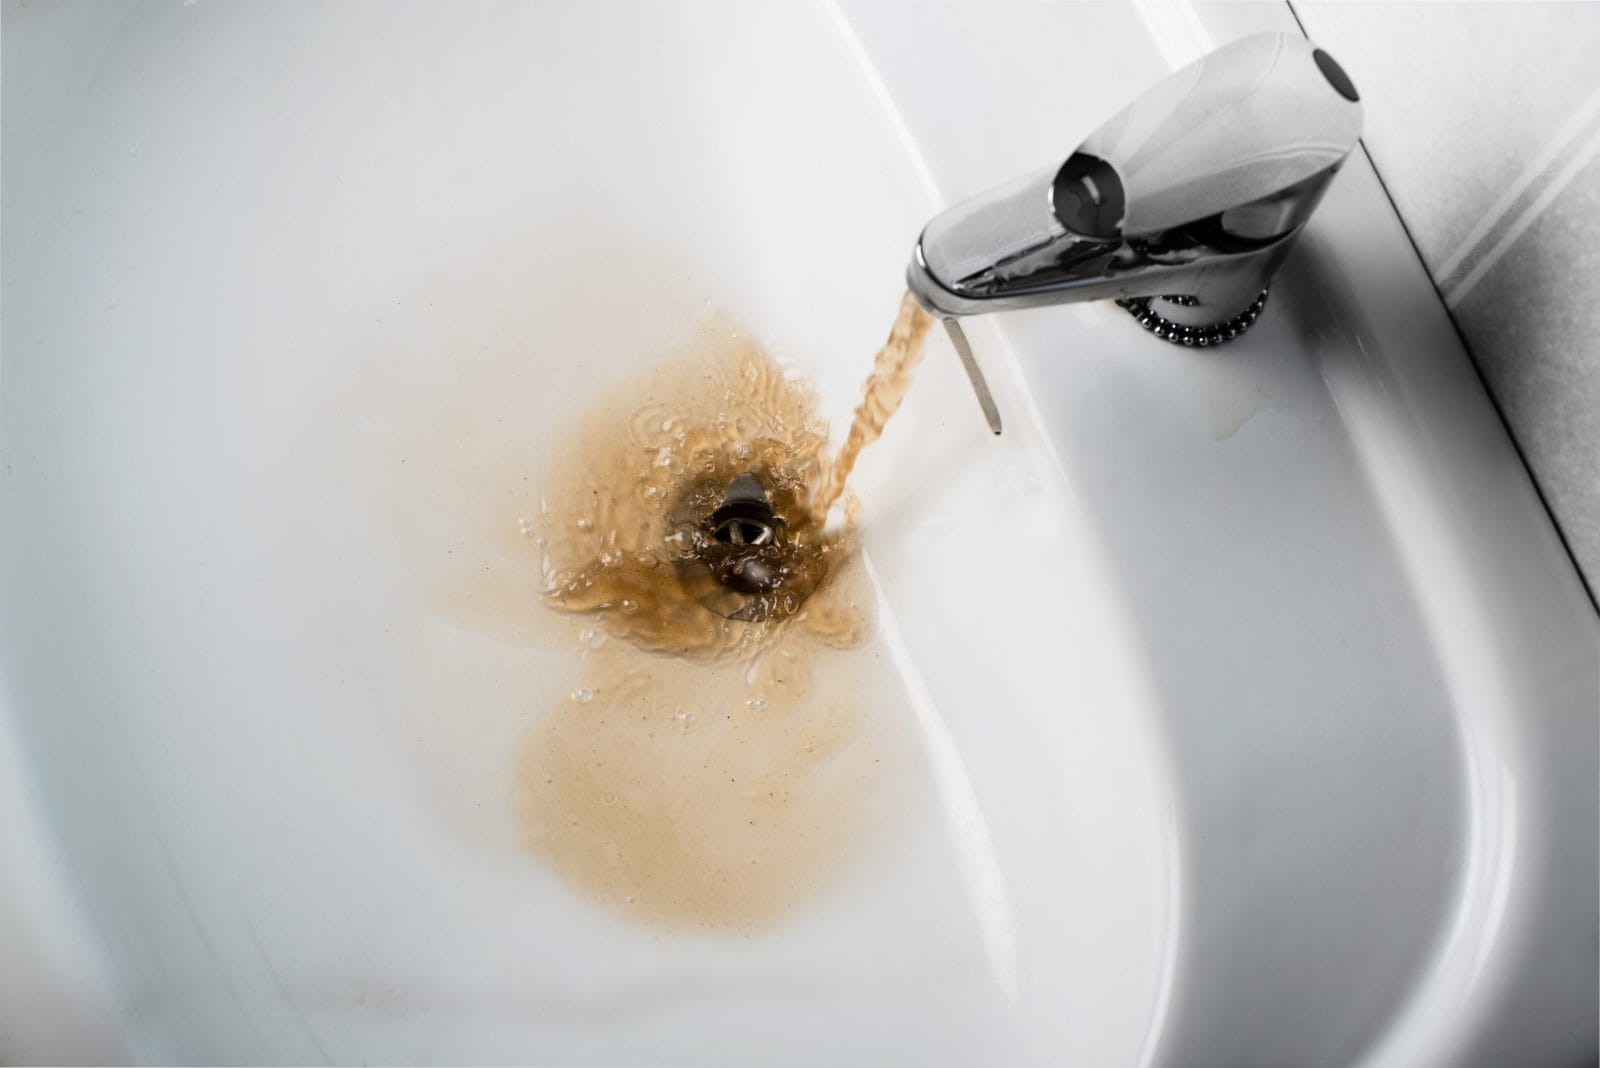 Dirty brown water running into a white sink